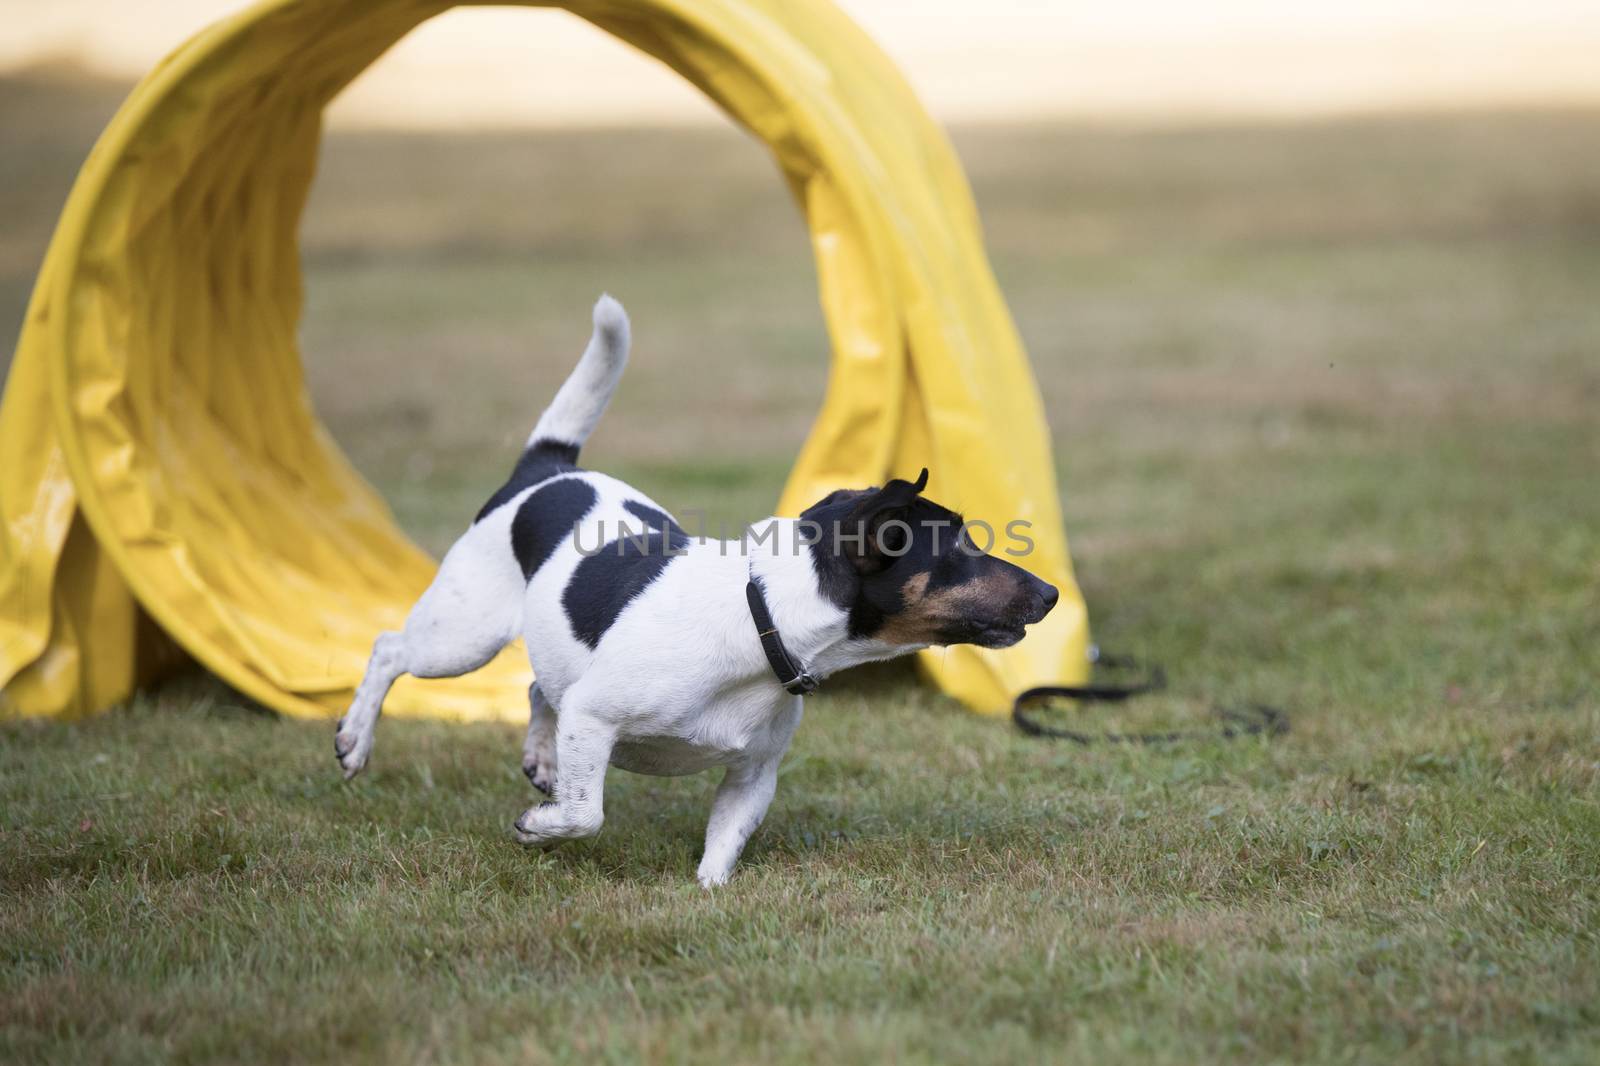 Jack Russell Terrier in agility training